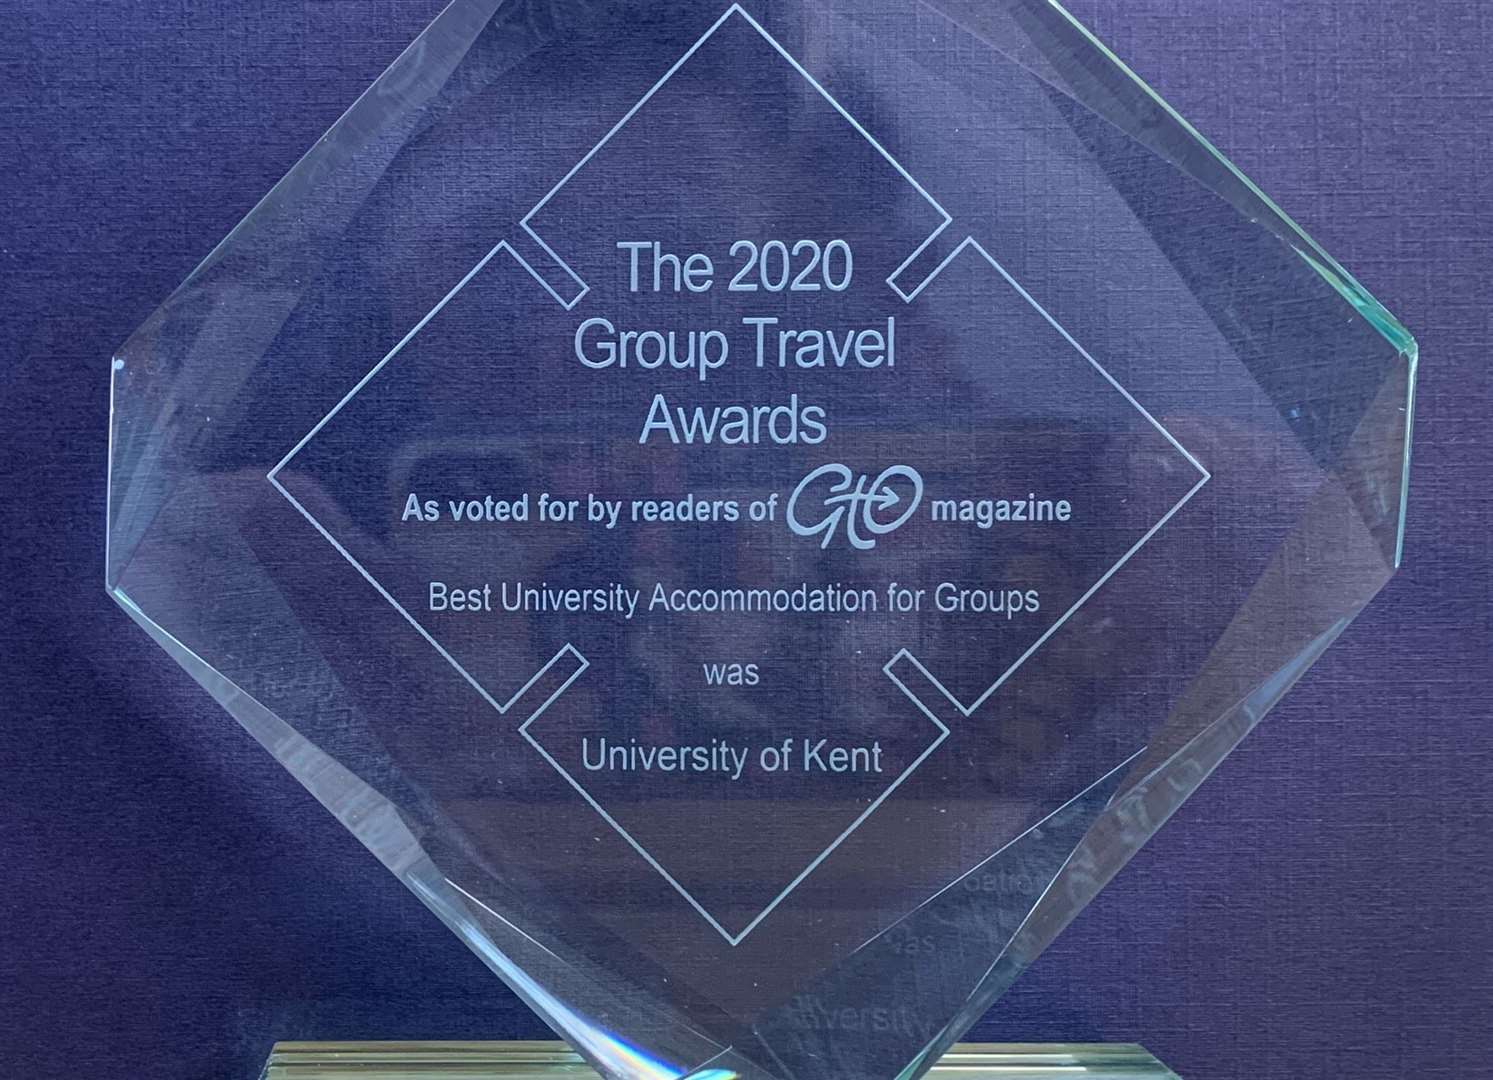 The award scooped by the University of Kent